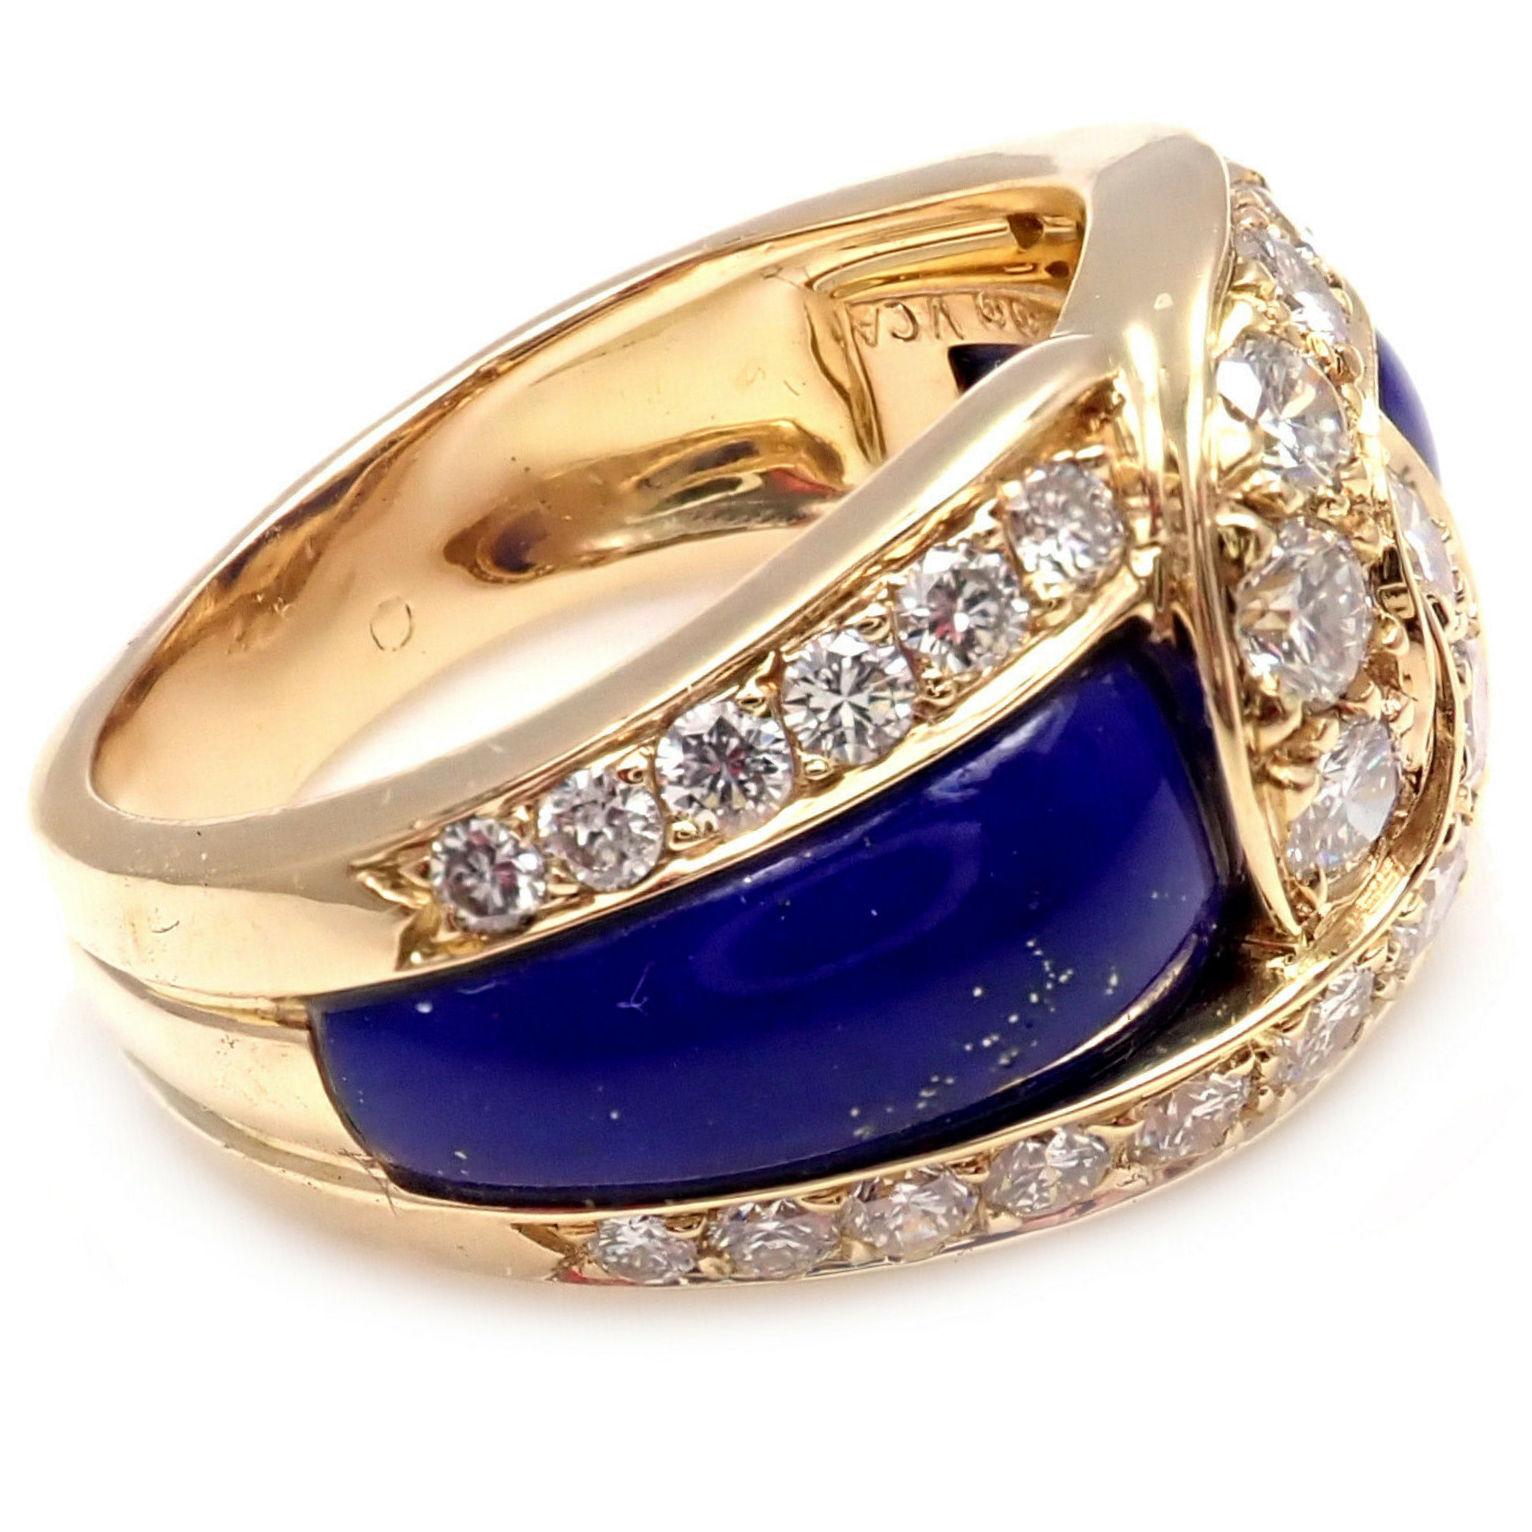 18k Yellow Gold Diamond & Lapis Lazuli Ring by Van Cleef & Arpels. 
With 30 Diamonds, VVS1 Clarity, E Color 1.00ctw
2x Lapis Stones 
Details: 
Ring Size: 5.5
Weight: 8.7 grams
Stamped Hallmarks: NY 5K656-99 VCA French 18k Assay Mark
*Free Shipping